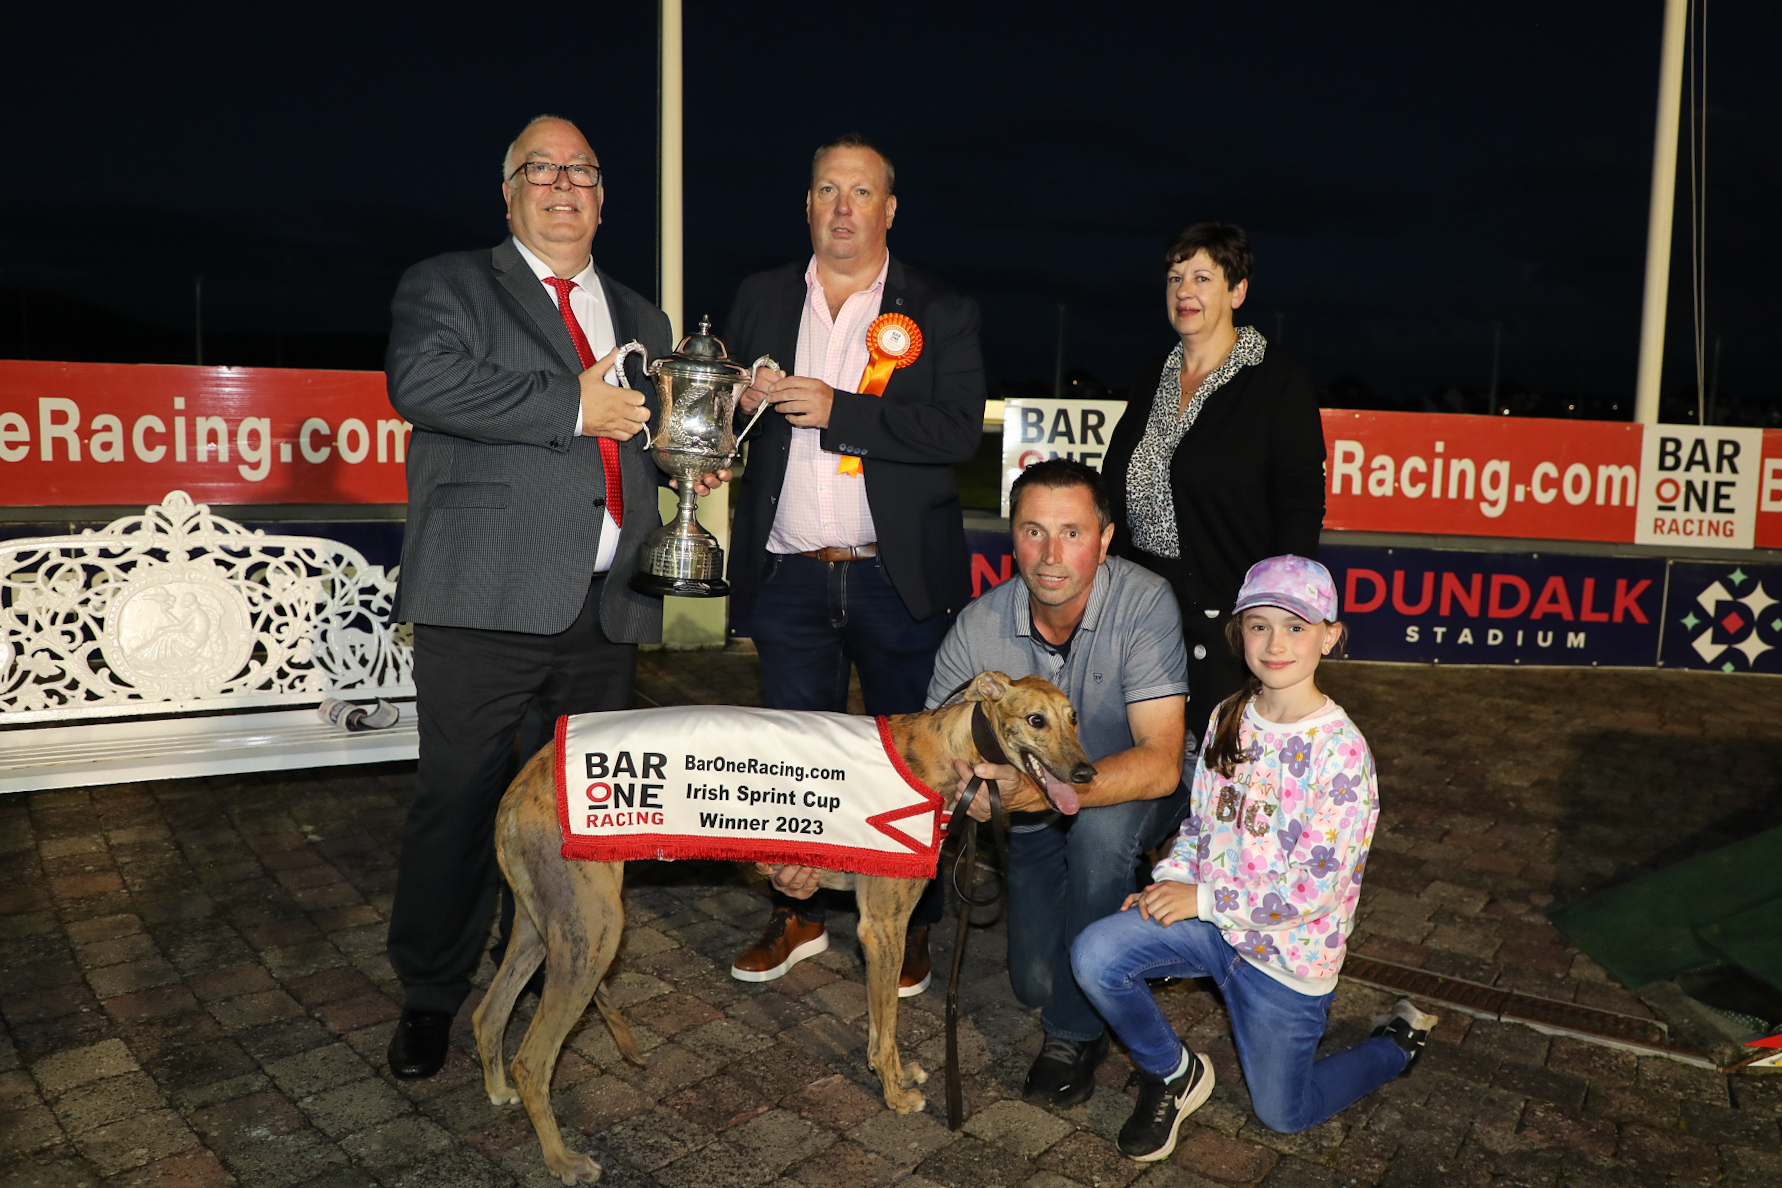 Carrick Aldo wins the 2023 Bar One Racing Irish Sprint Cup in Dundalk Stadium   Congratulations to Carrick Aldo, owner Thomas Glynn, trainer David Murray and all the connections. With a time of 20.80 - the fastest Irish Sprint Cup Final ever! 